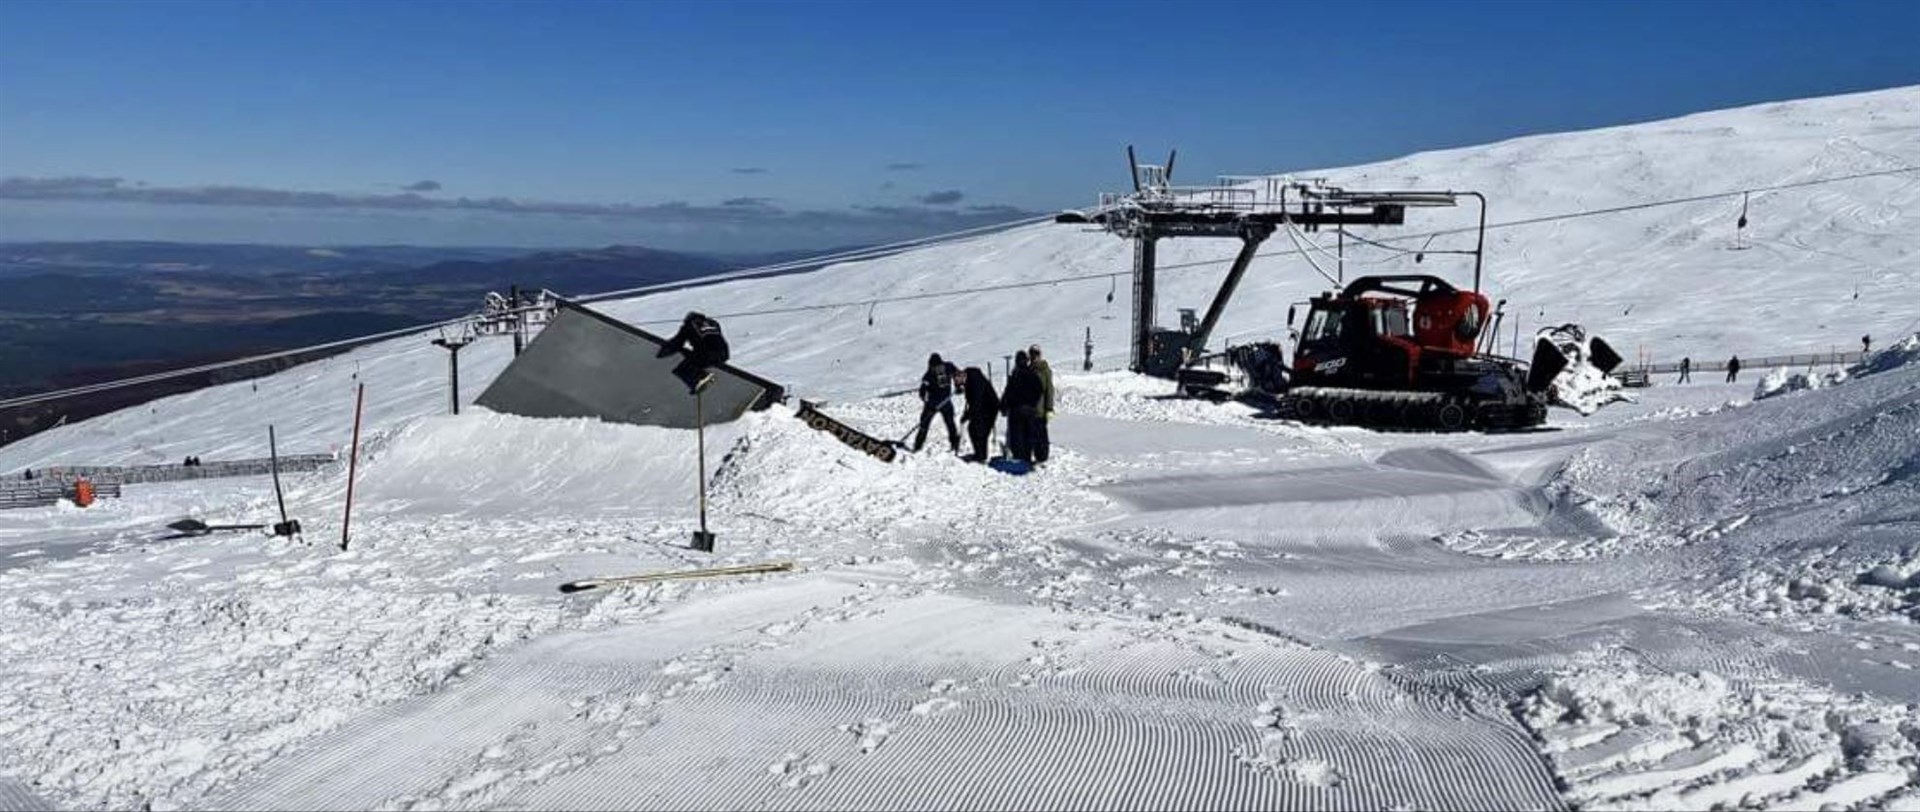 Cairngorm Mountain staff busy preparing the slopestyle course at the Ptarmigan for THE BRITS. Picture: Colin Matthew.